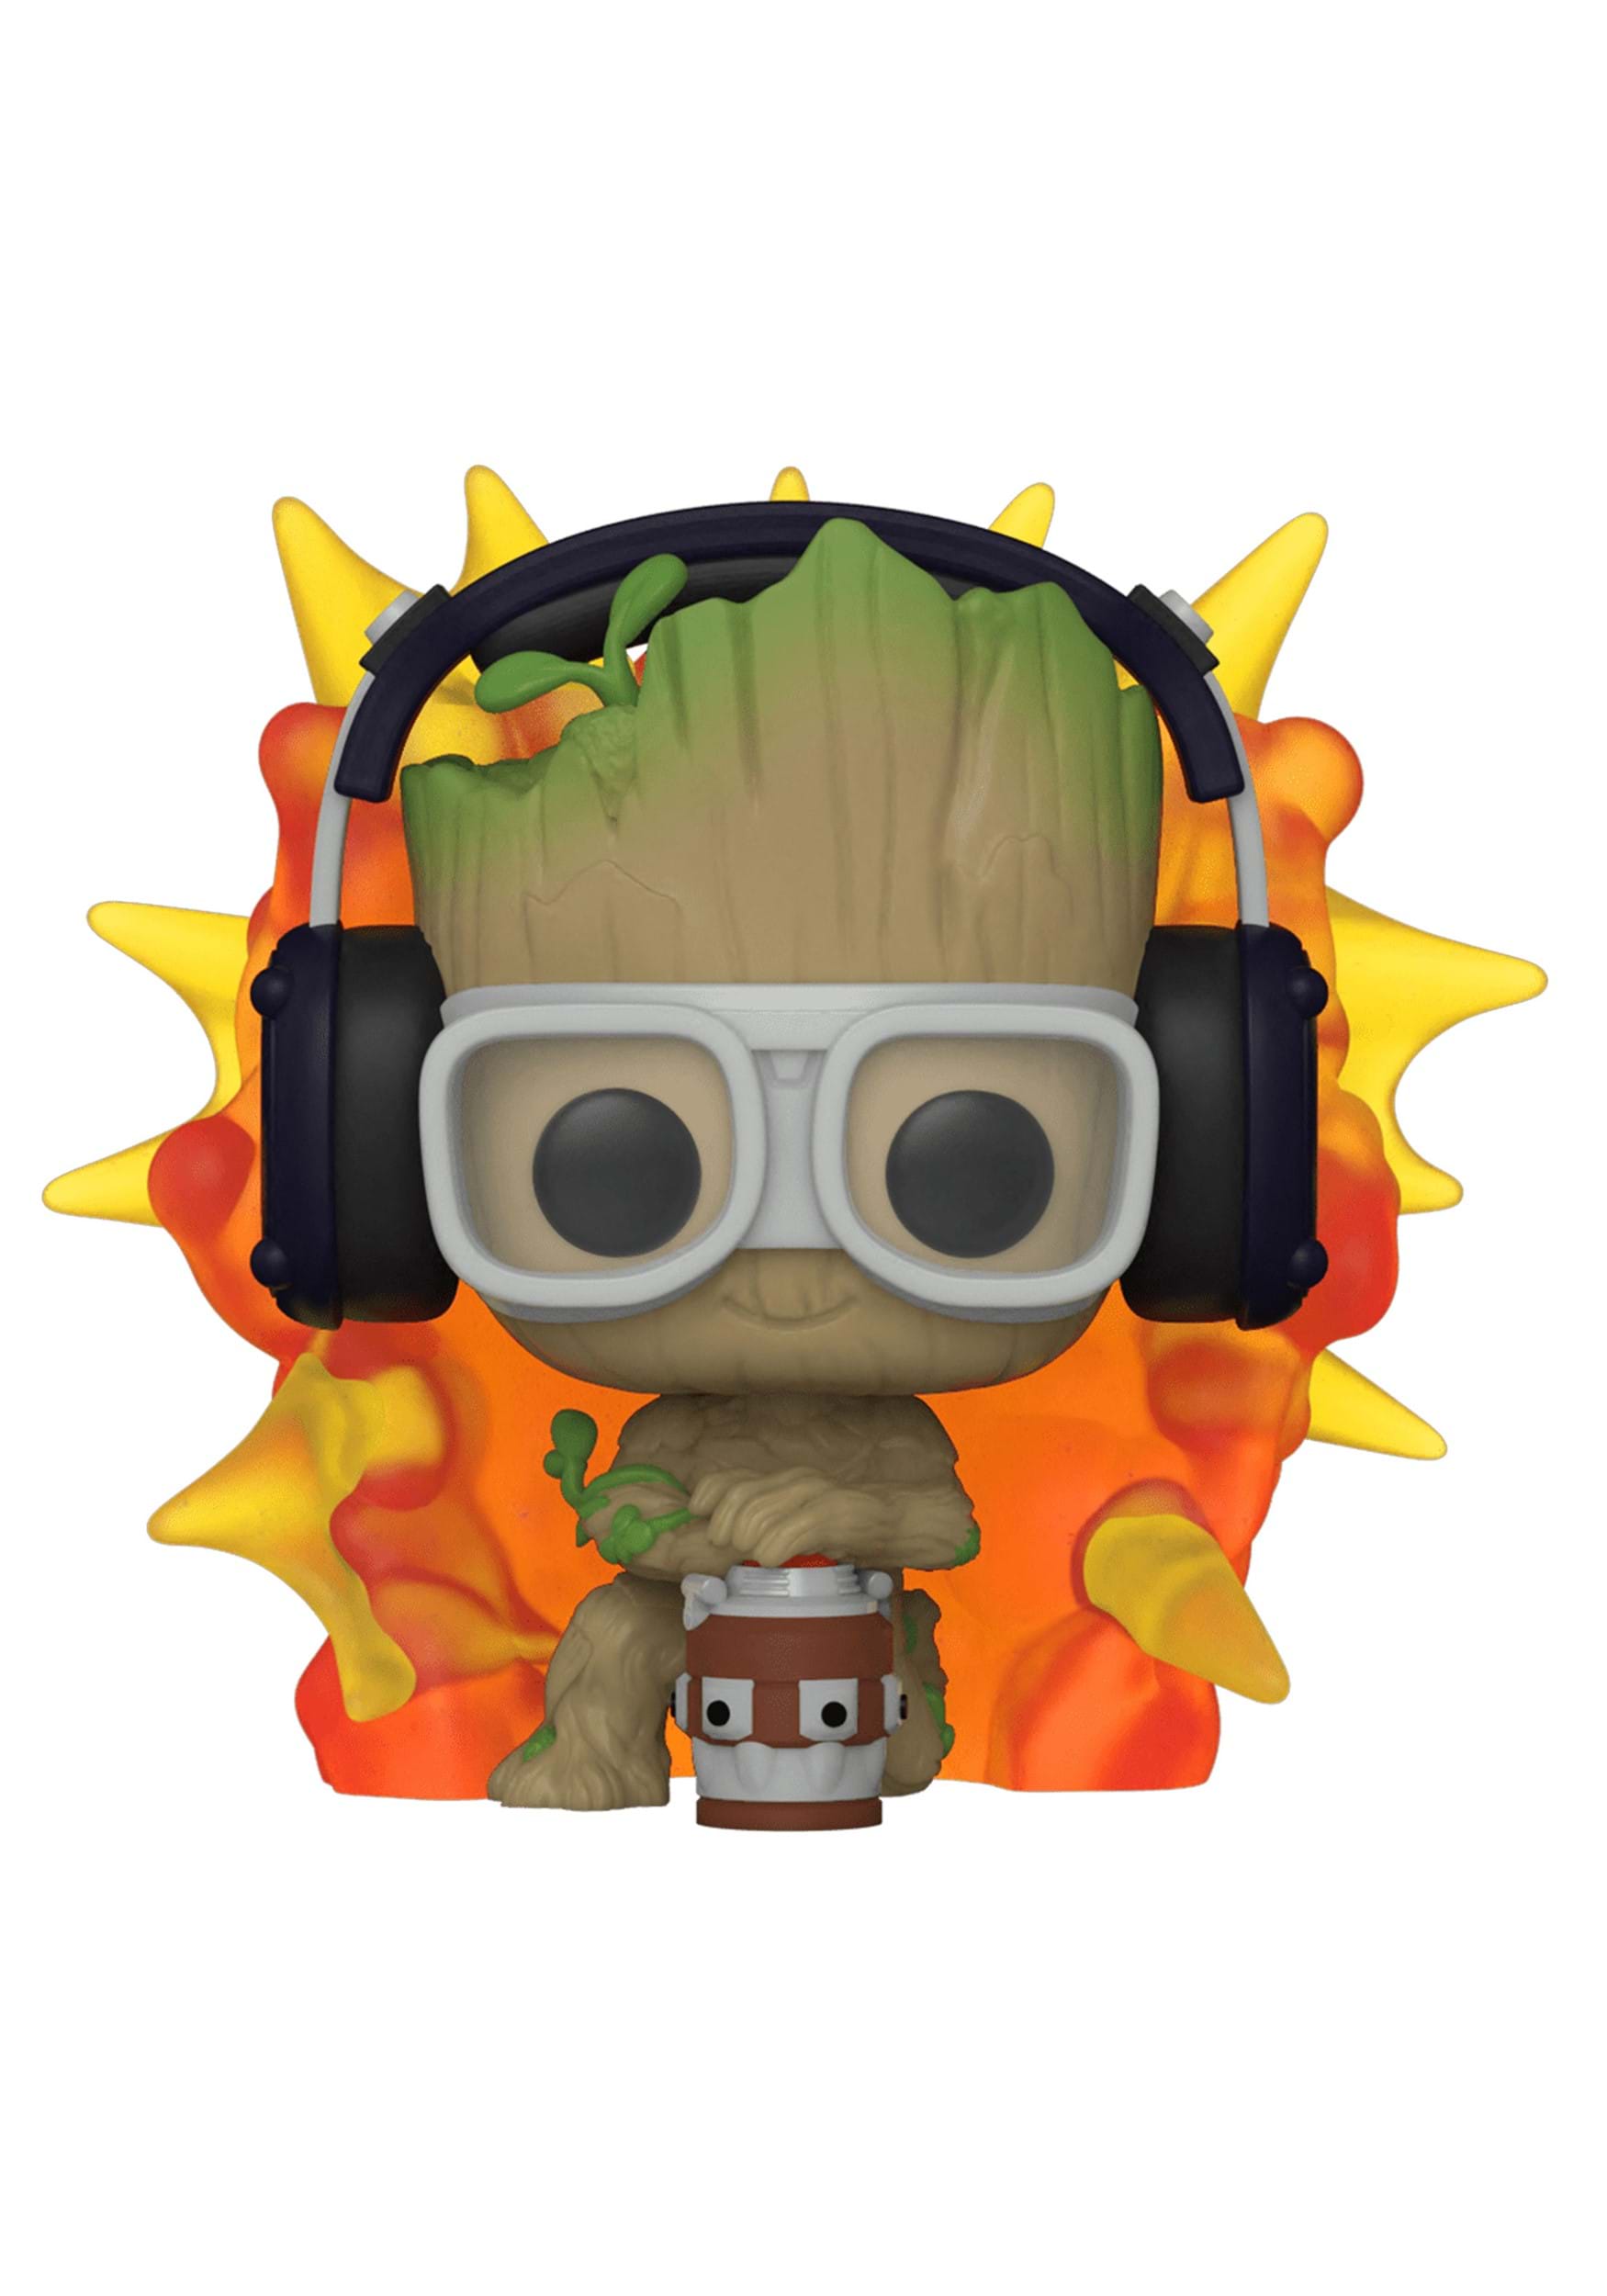 https://images.fun.co.uk/products/91141/1-1/pop-marvel-i-am-groot-groot-with-detonator.jpg